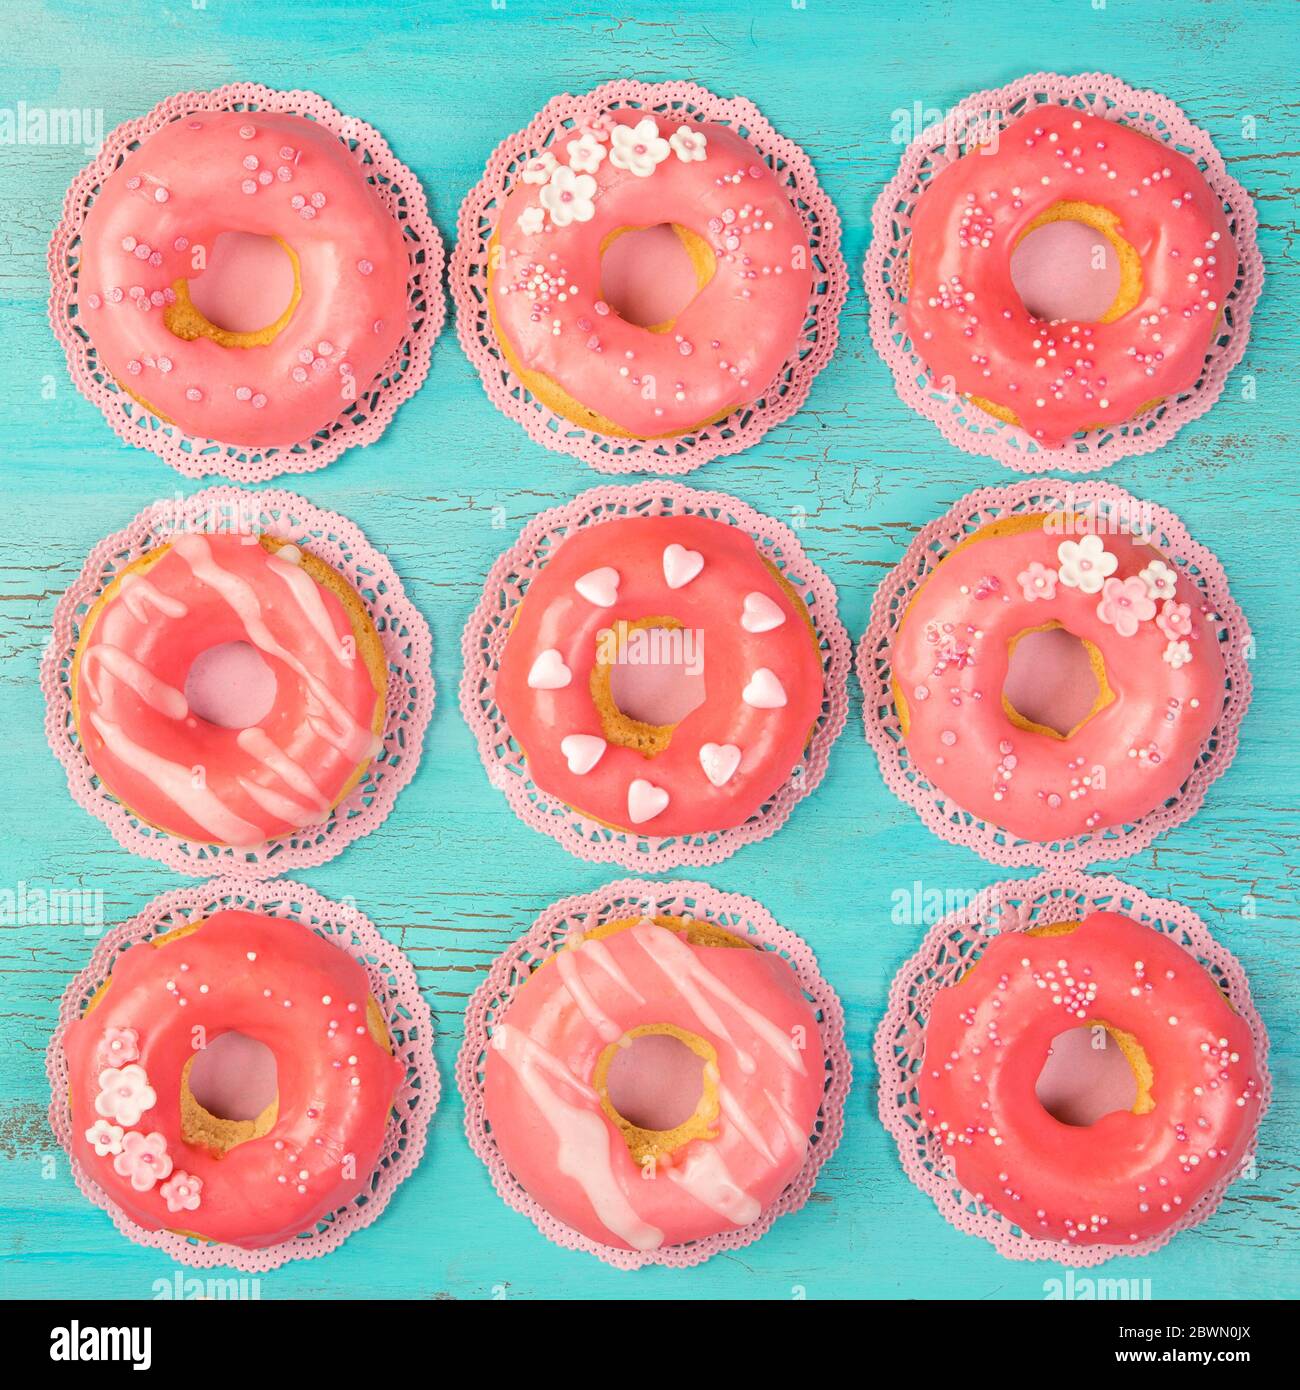 Coral colored donuts on a blue wooden background Stock Photo